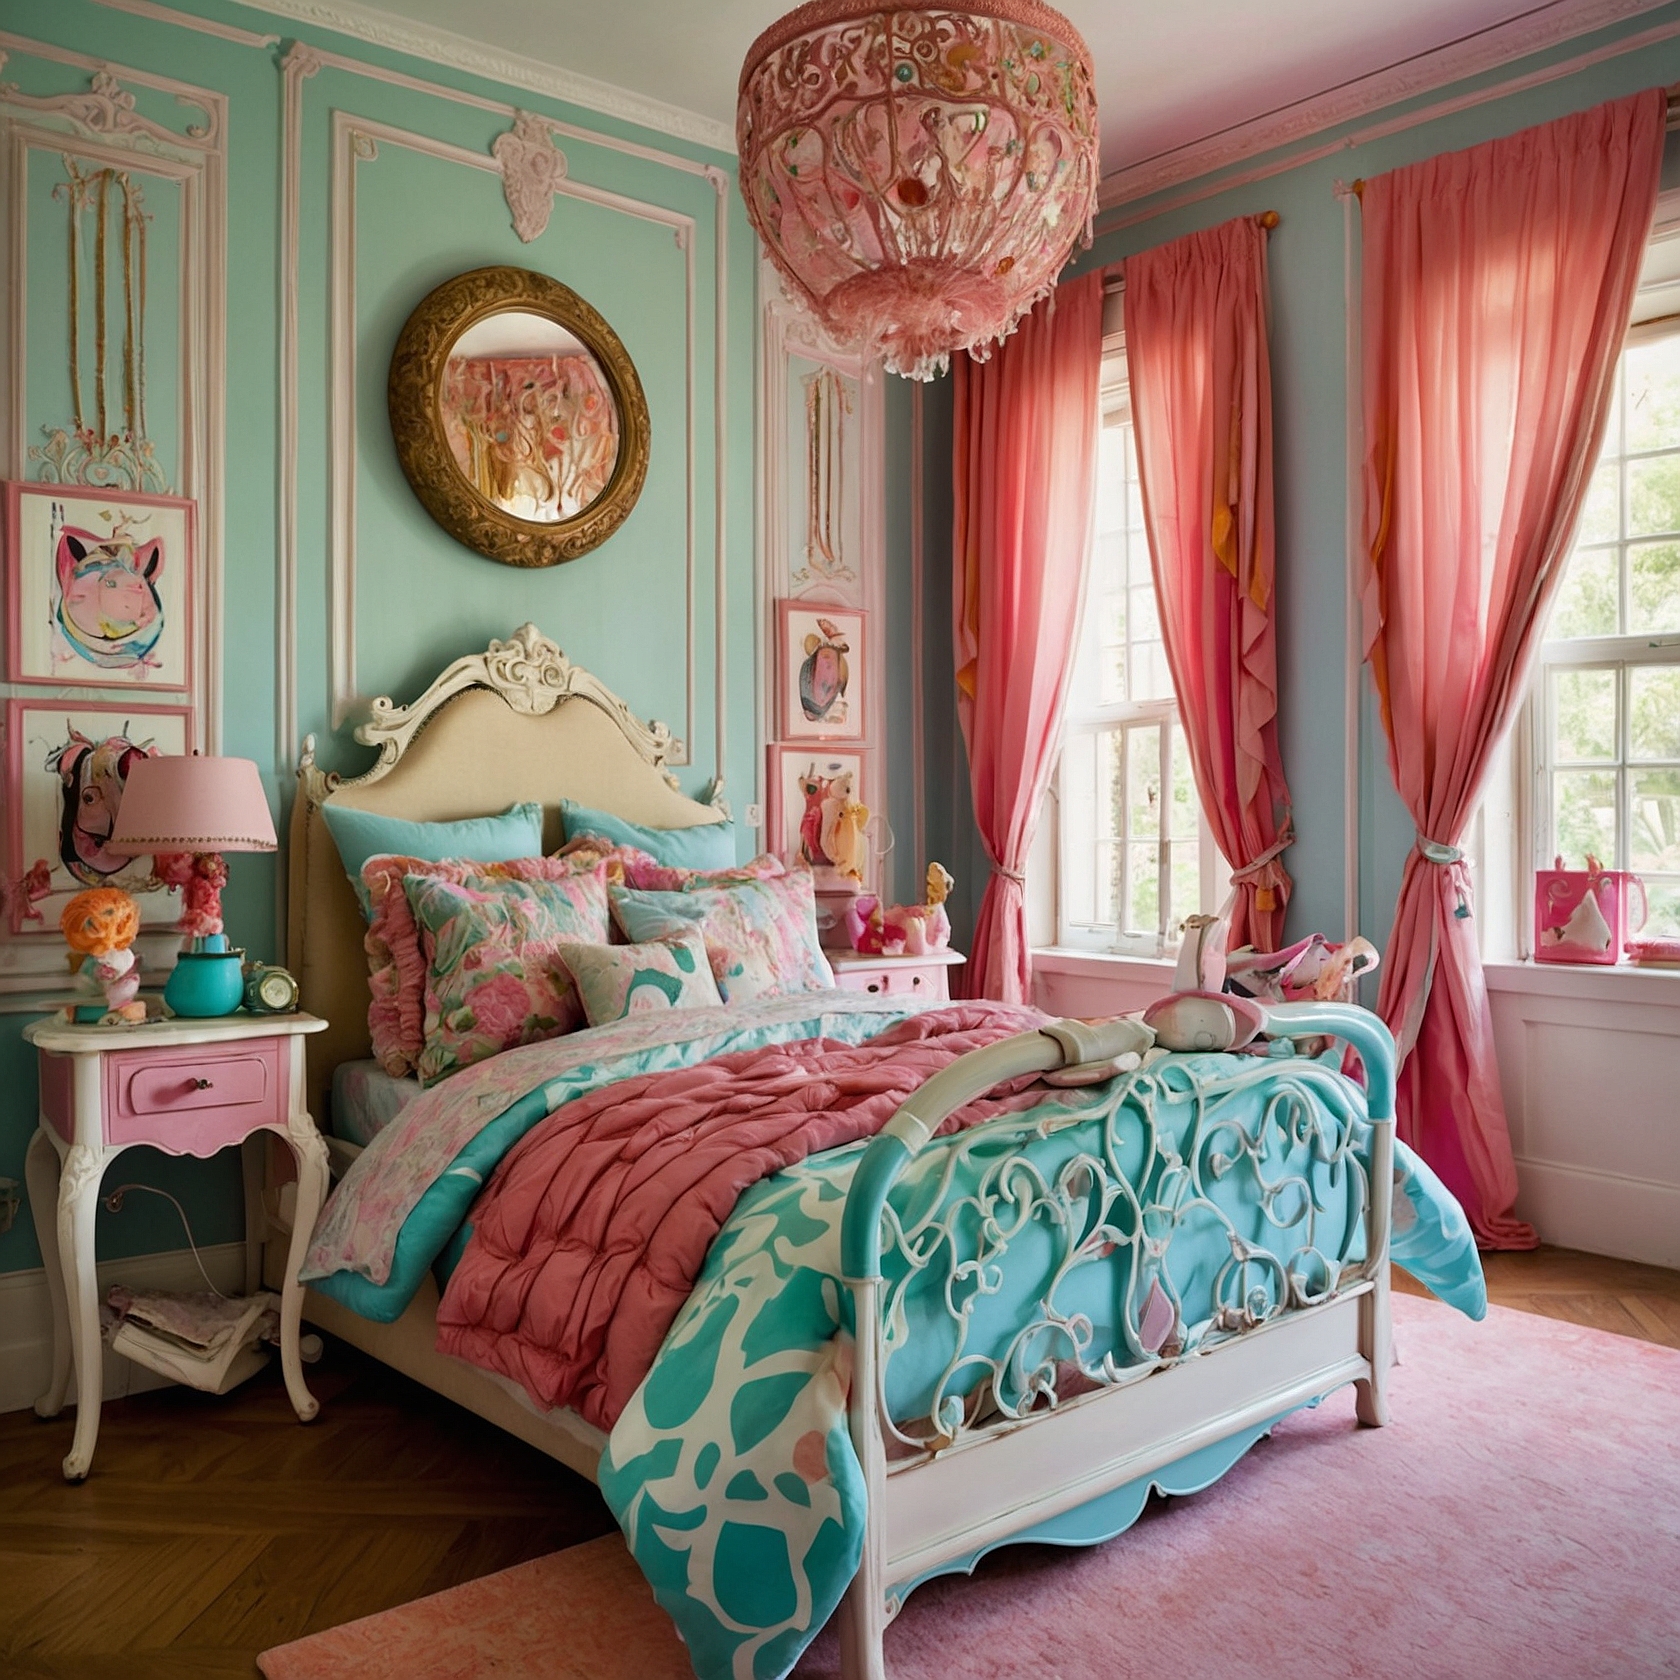 Pastel Victorian Design With Wall Panelings